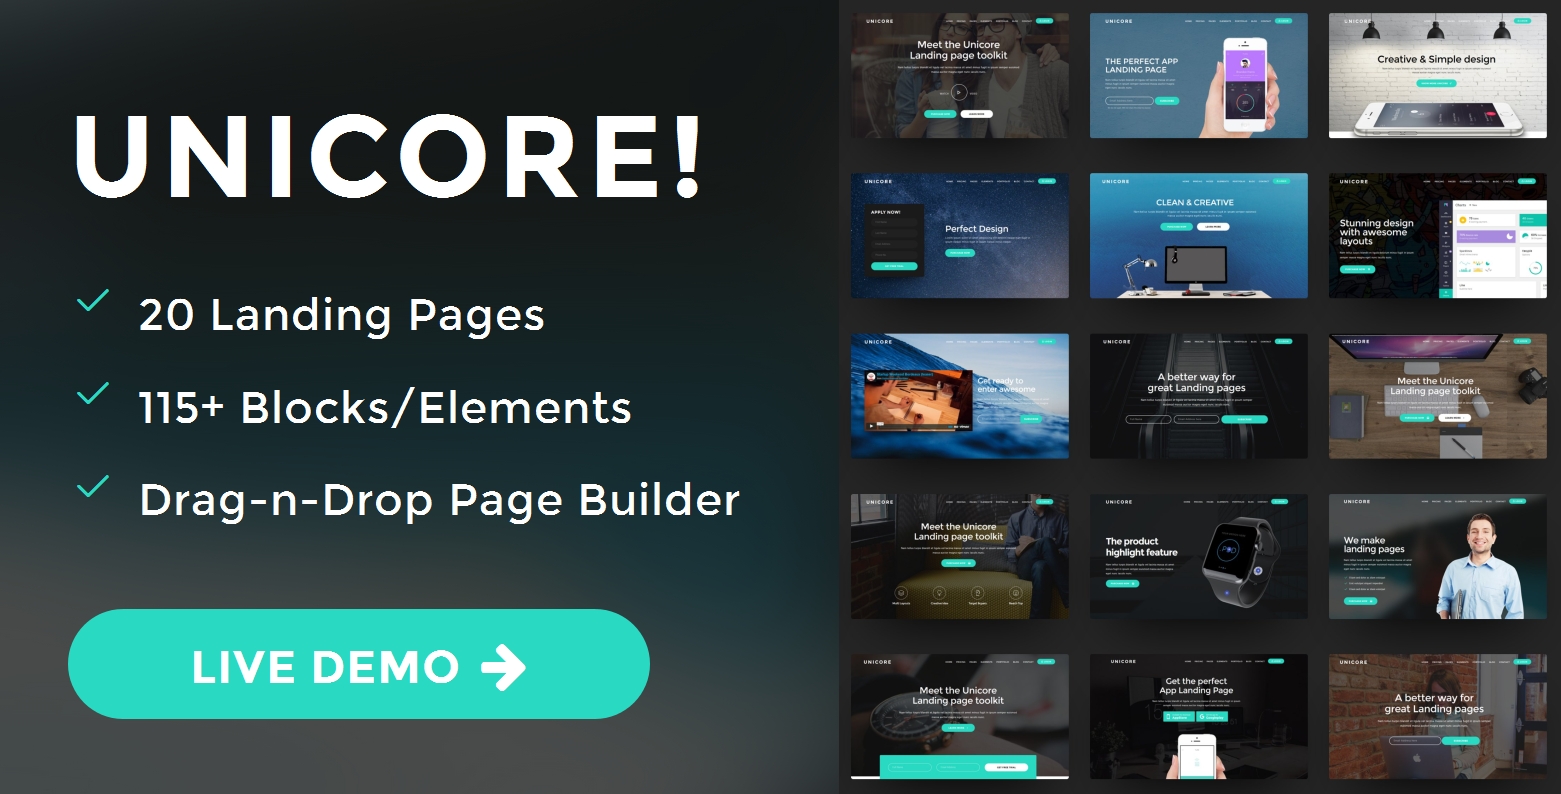  Bootstrap Material Design Theme Template